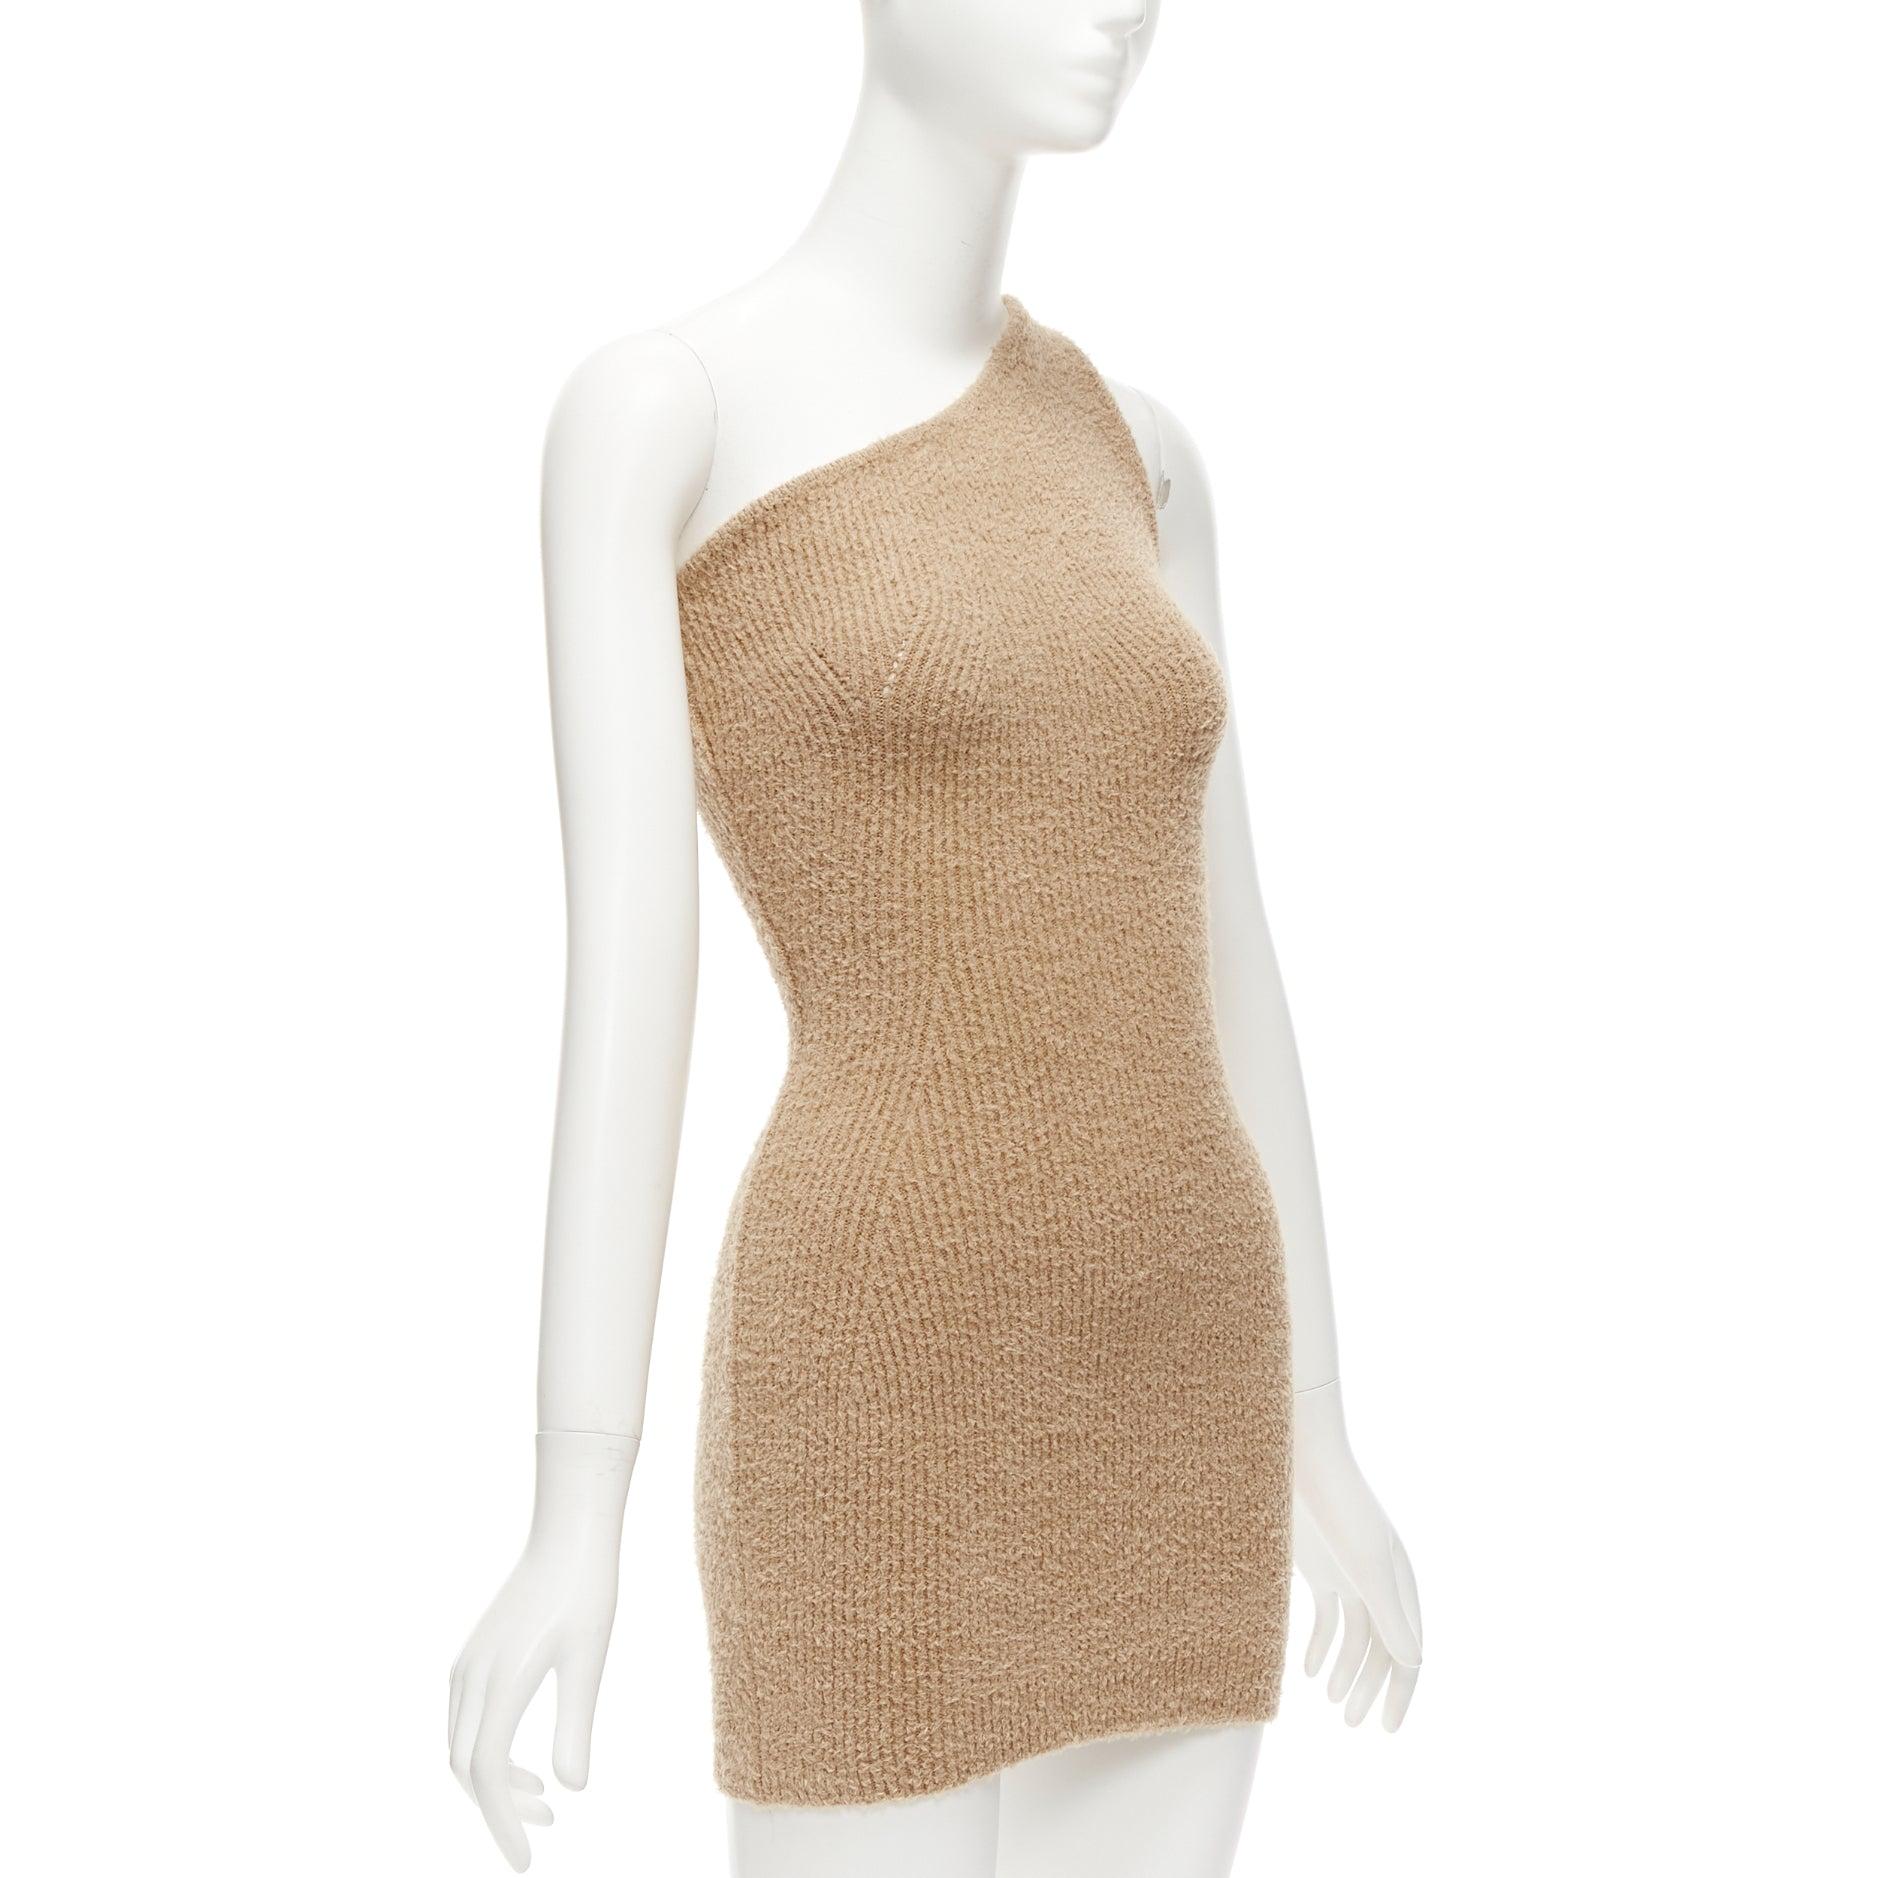 WARDROBE NYC HAILEY BIEBER HB tan fuzzy knit cotton one shoulder mini dress S In Excellent Condition For Sale In Hong Kong, NT